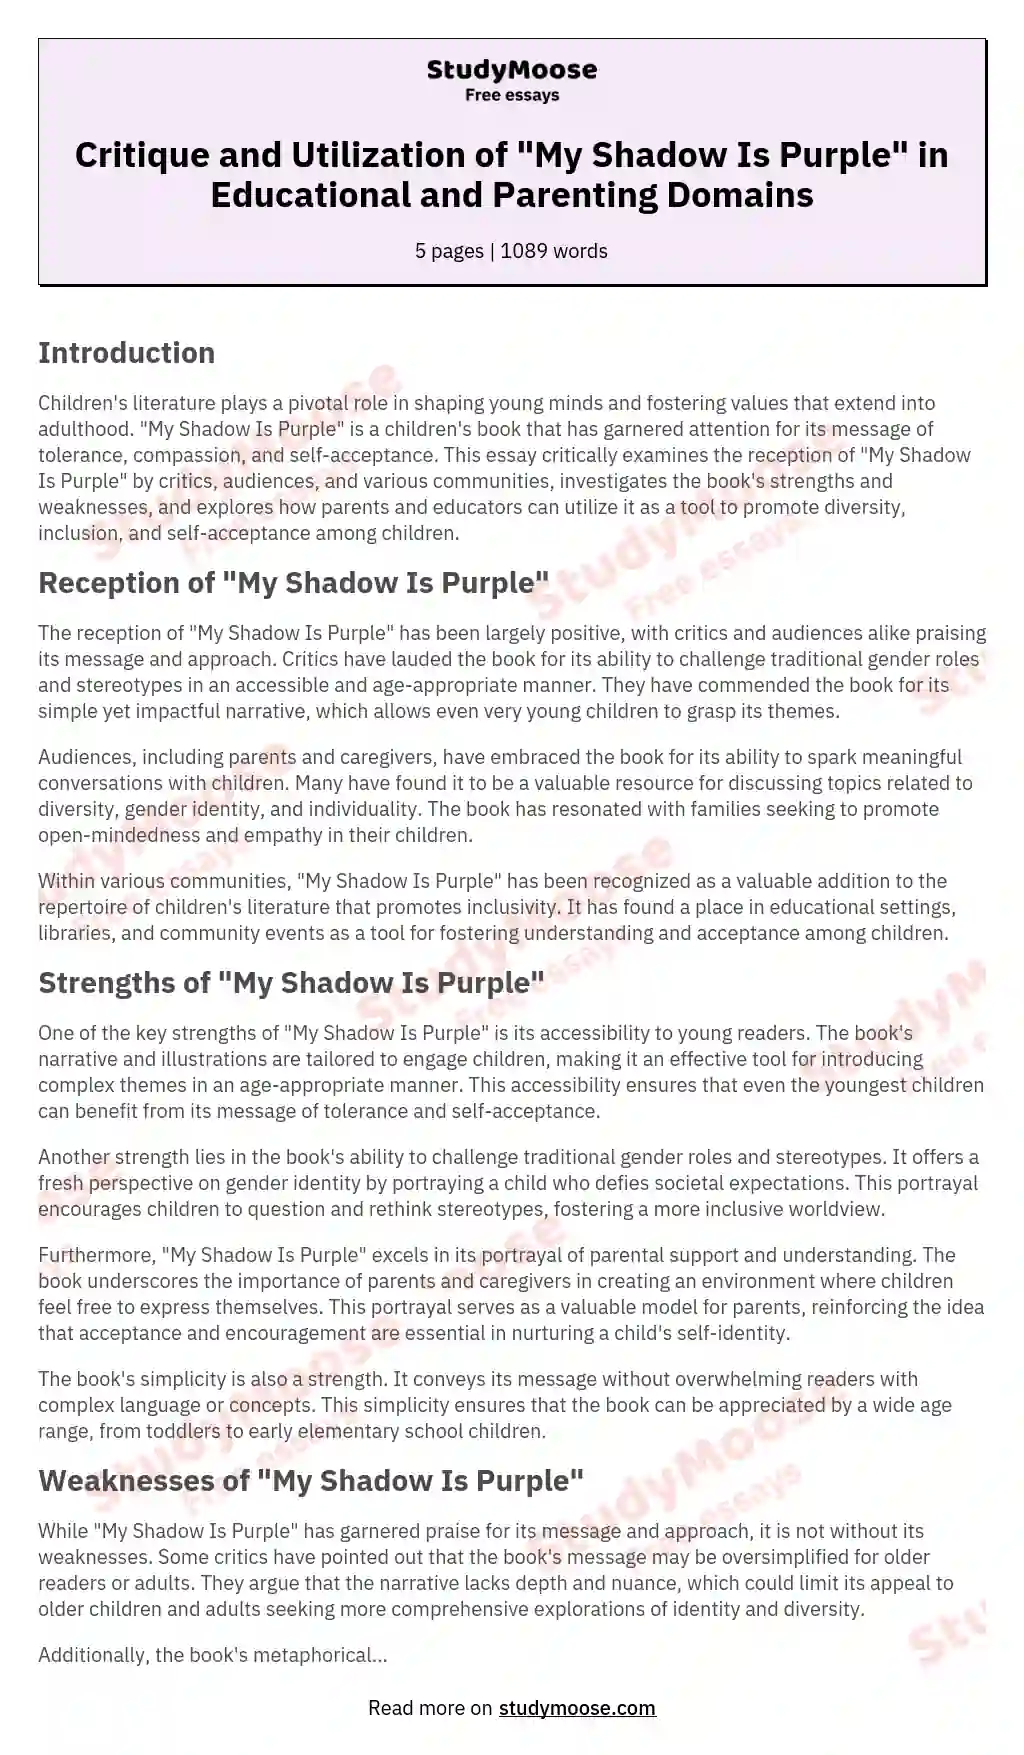 Critique and Utilization of "My Shadow Is Purple" in Educational and Parenting Domains essay